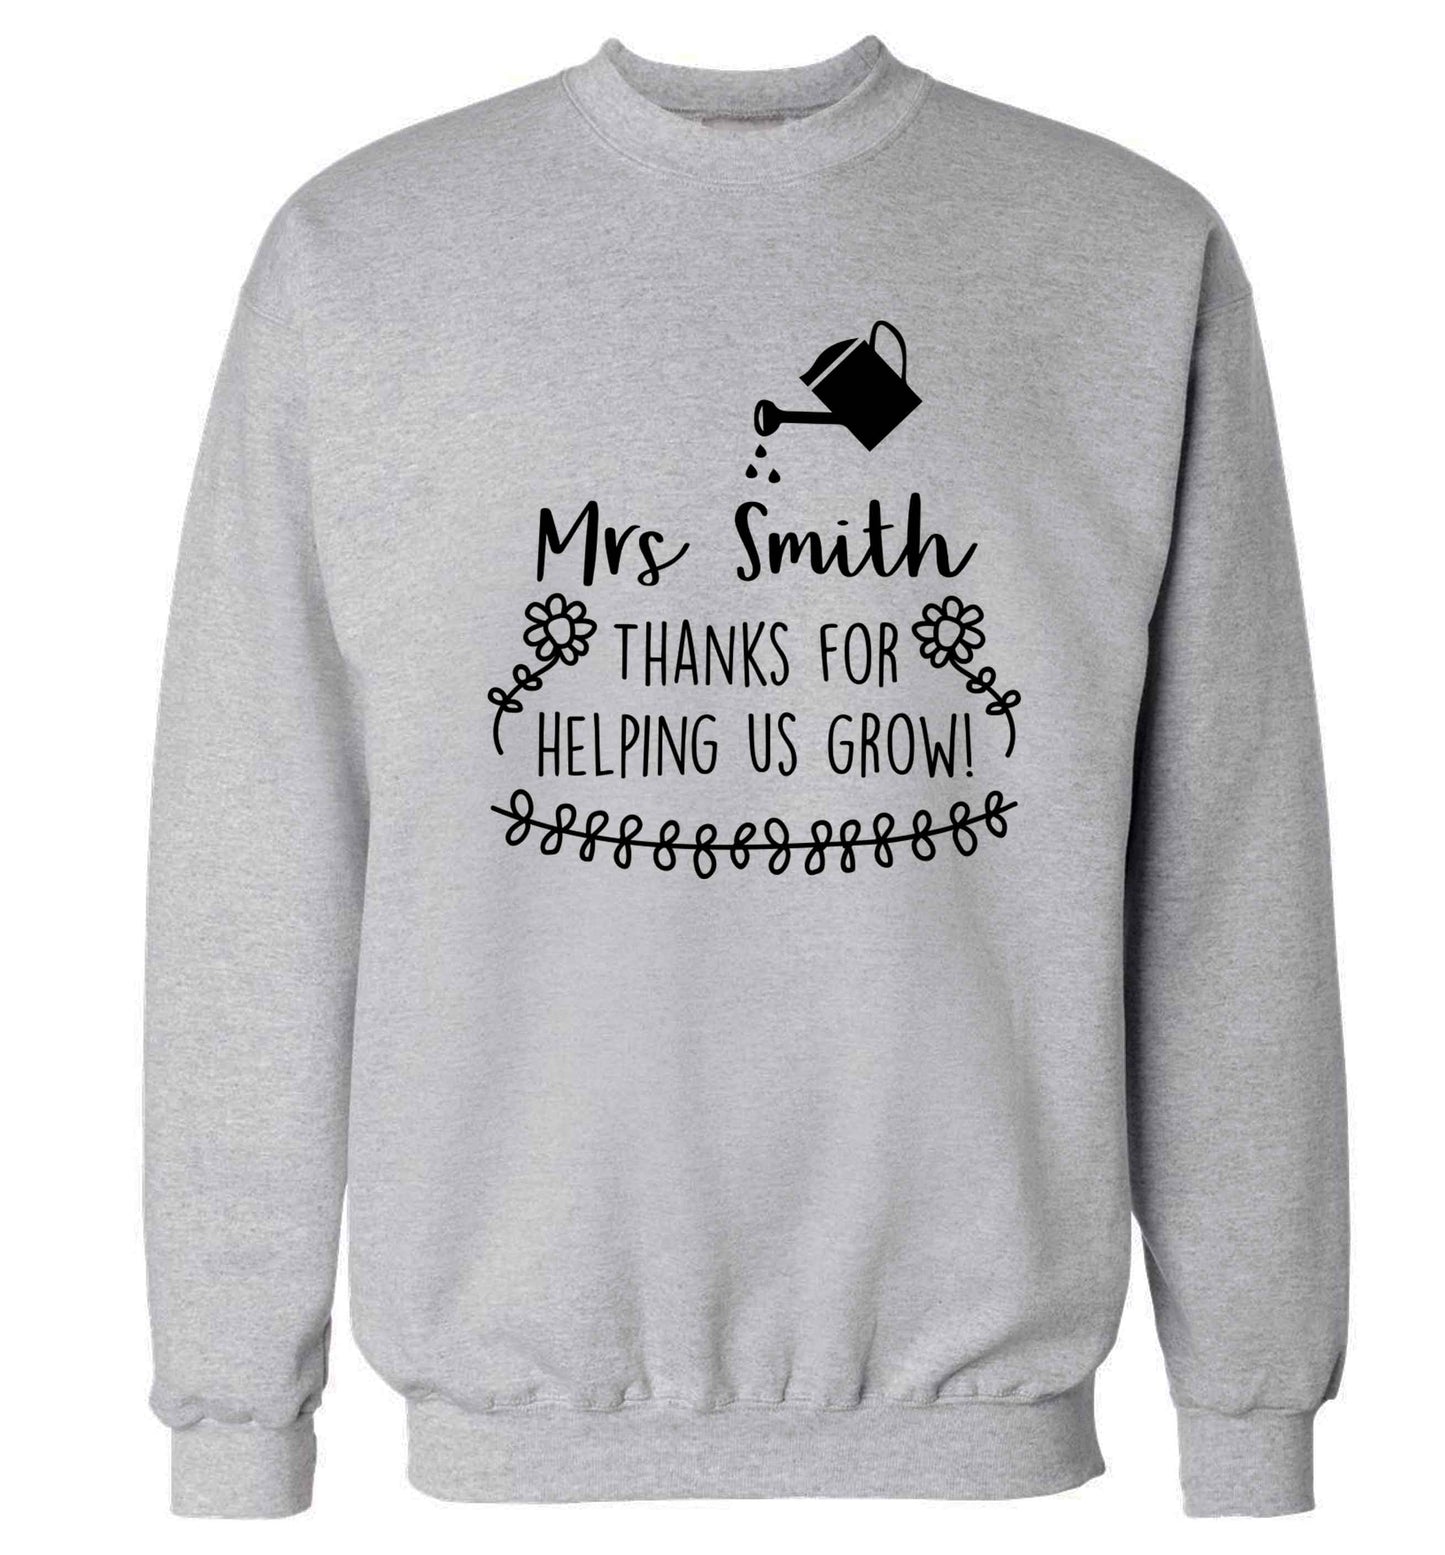 Personalised Mrs Smith thanks for helping us grow Adult's unisex grey Sweater 2XL